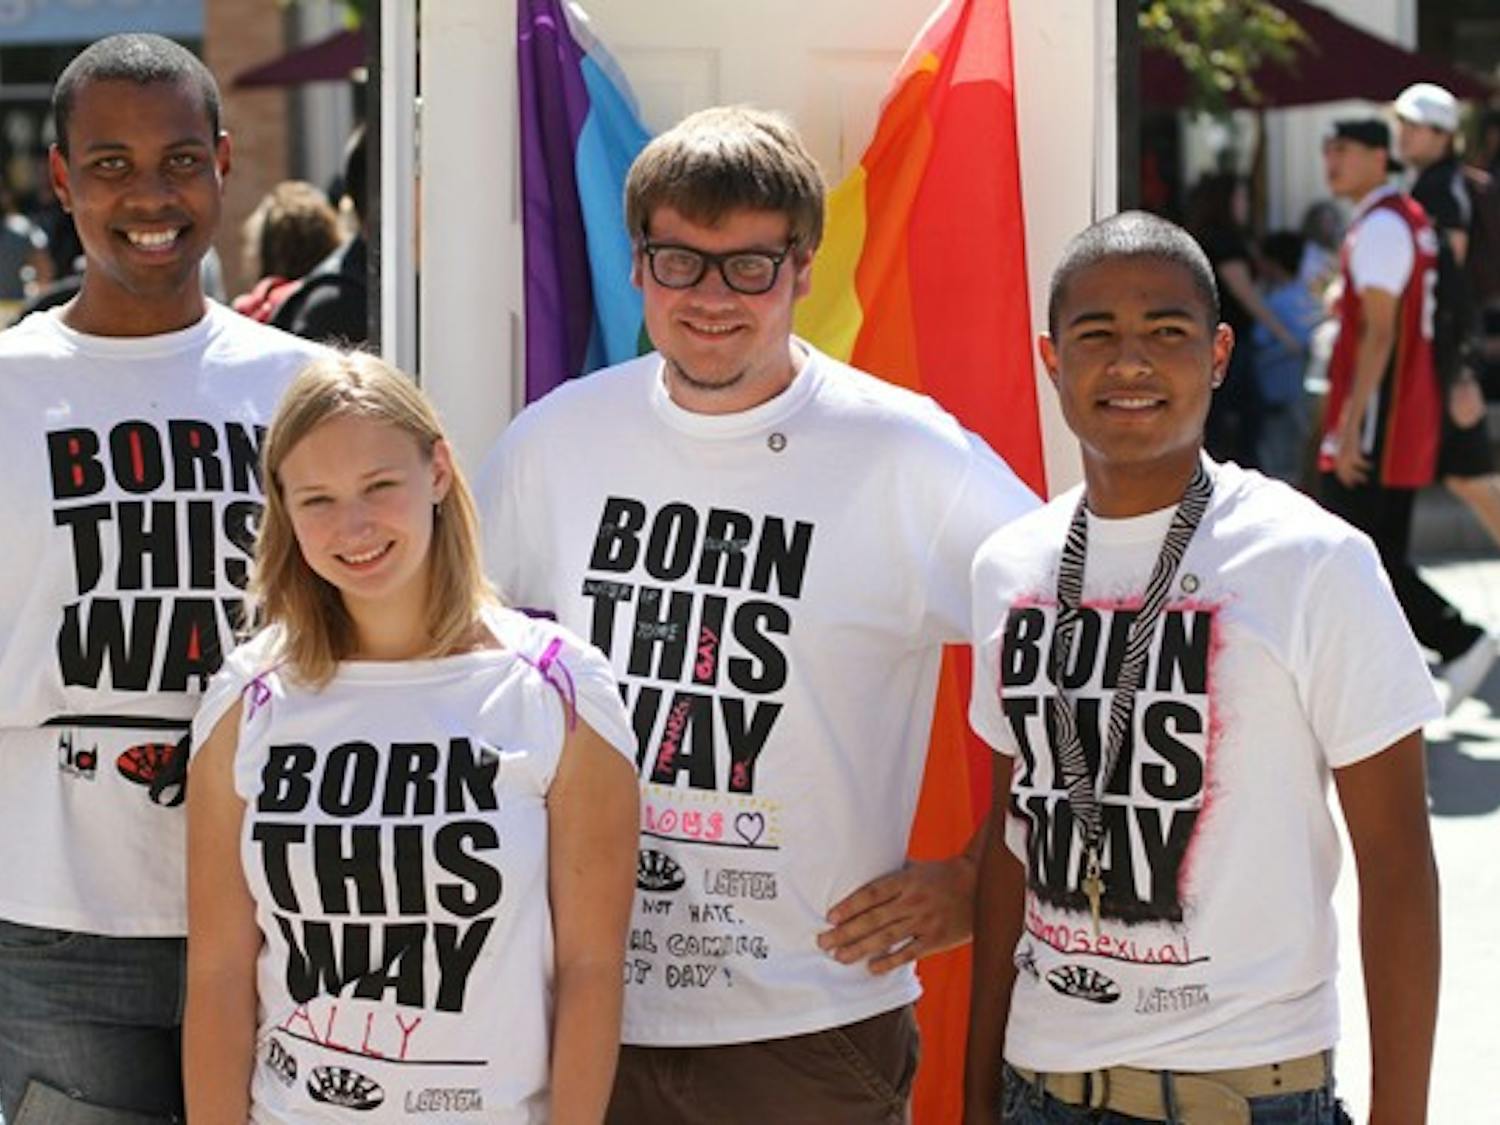 SHOWING PRIDE: Brian Fleming, Jackie Chikos, Oliver Migliore and Jessie Flores show off their "Born This Way" t-shirts outside of the Memorial Tuesday as part of the LGBTQA Coalition's Coming Out Day. (Photo by Lisa Bartoli)